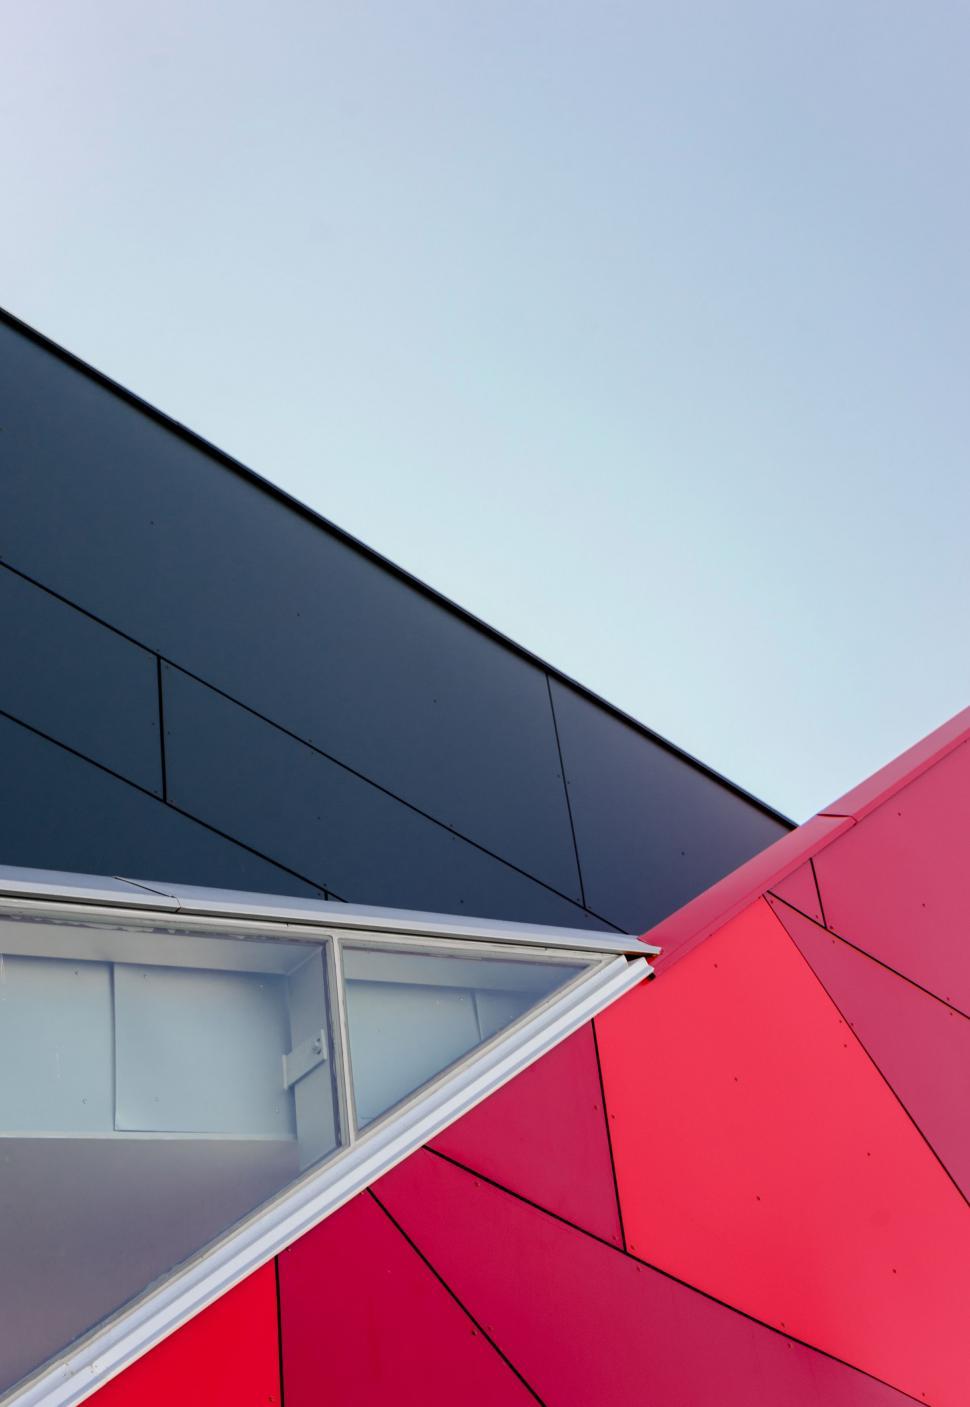 Free Image of Close Up of a Red and Black Building 